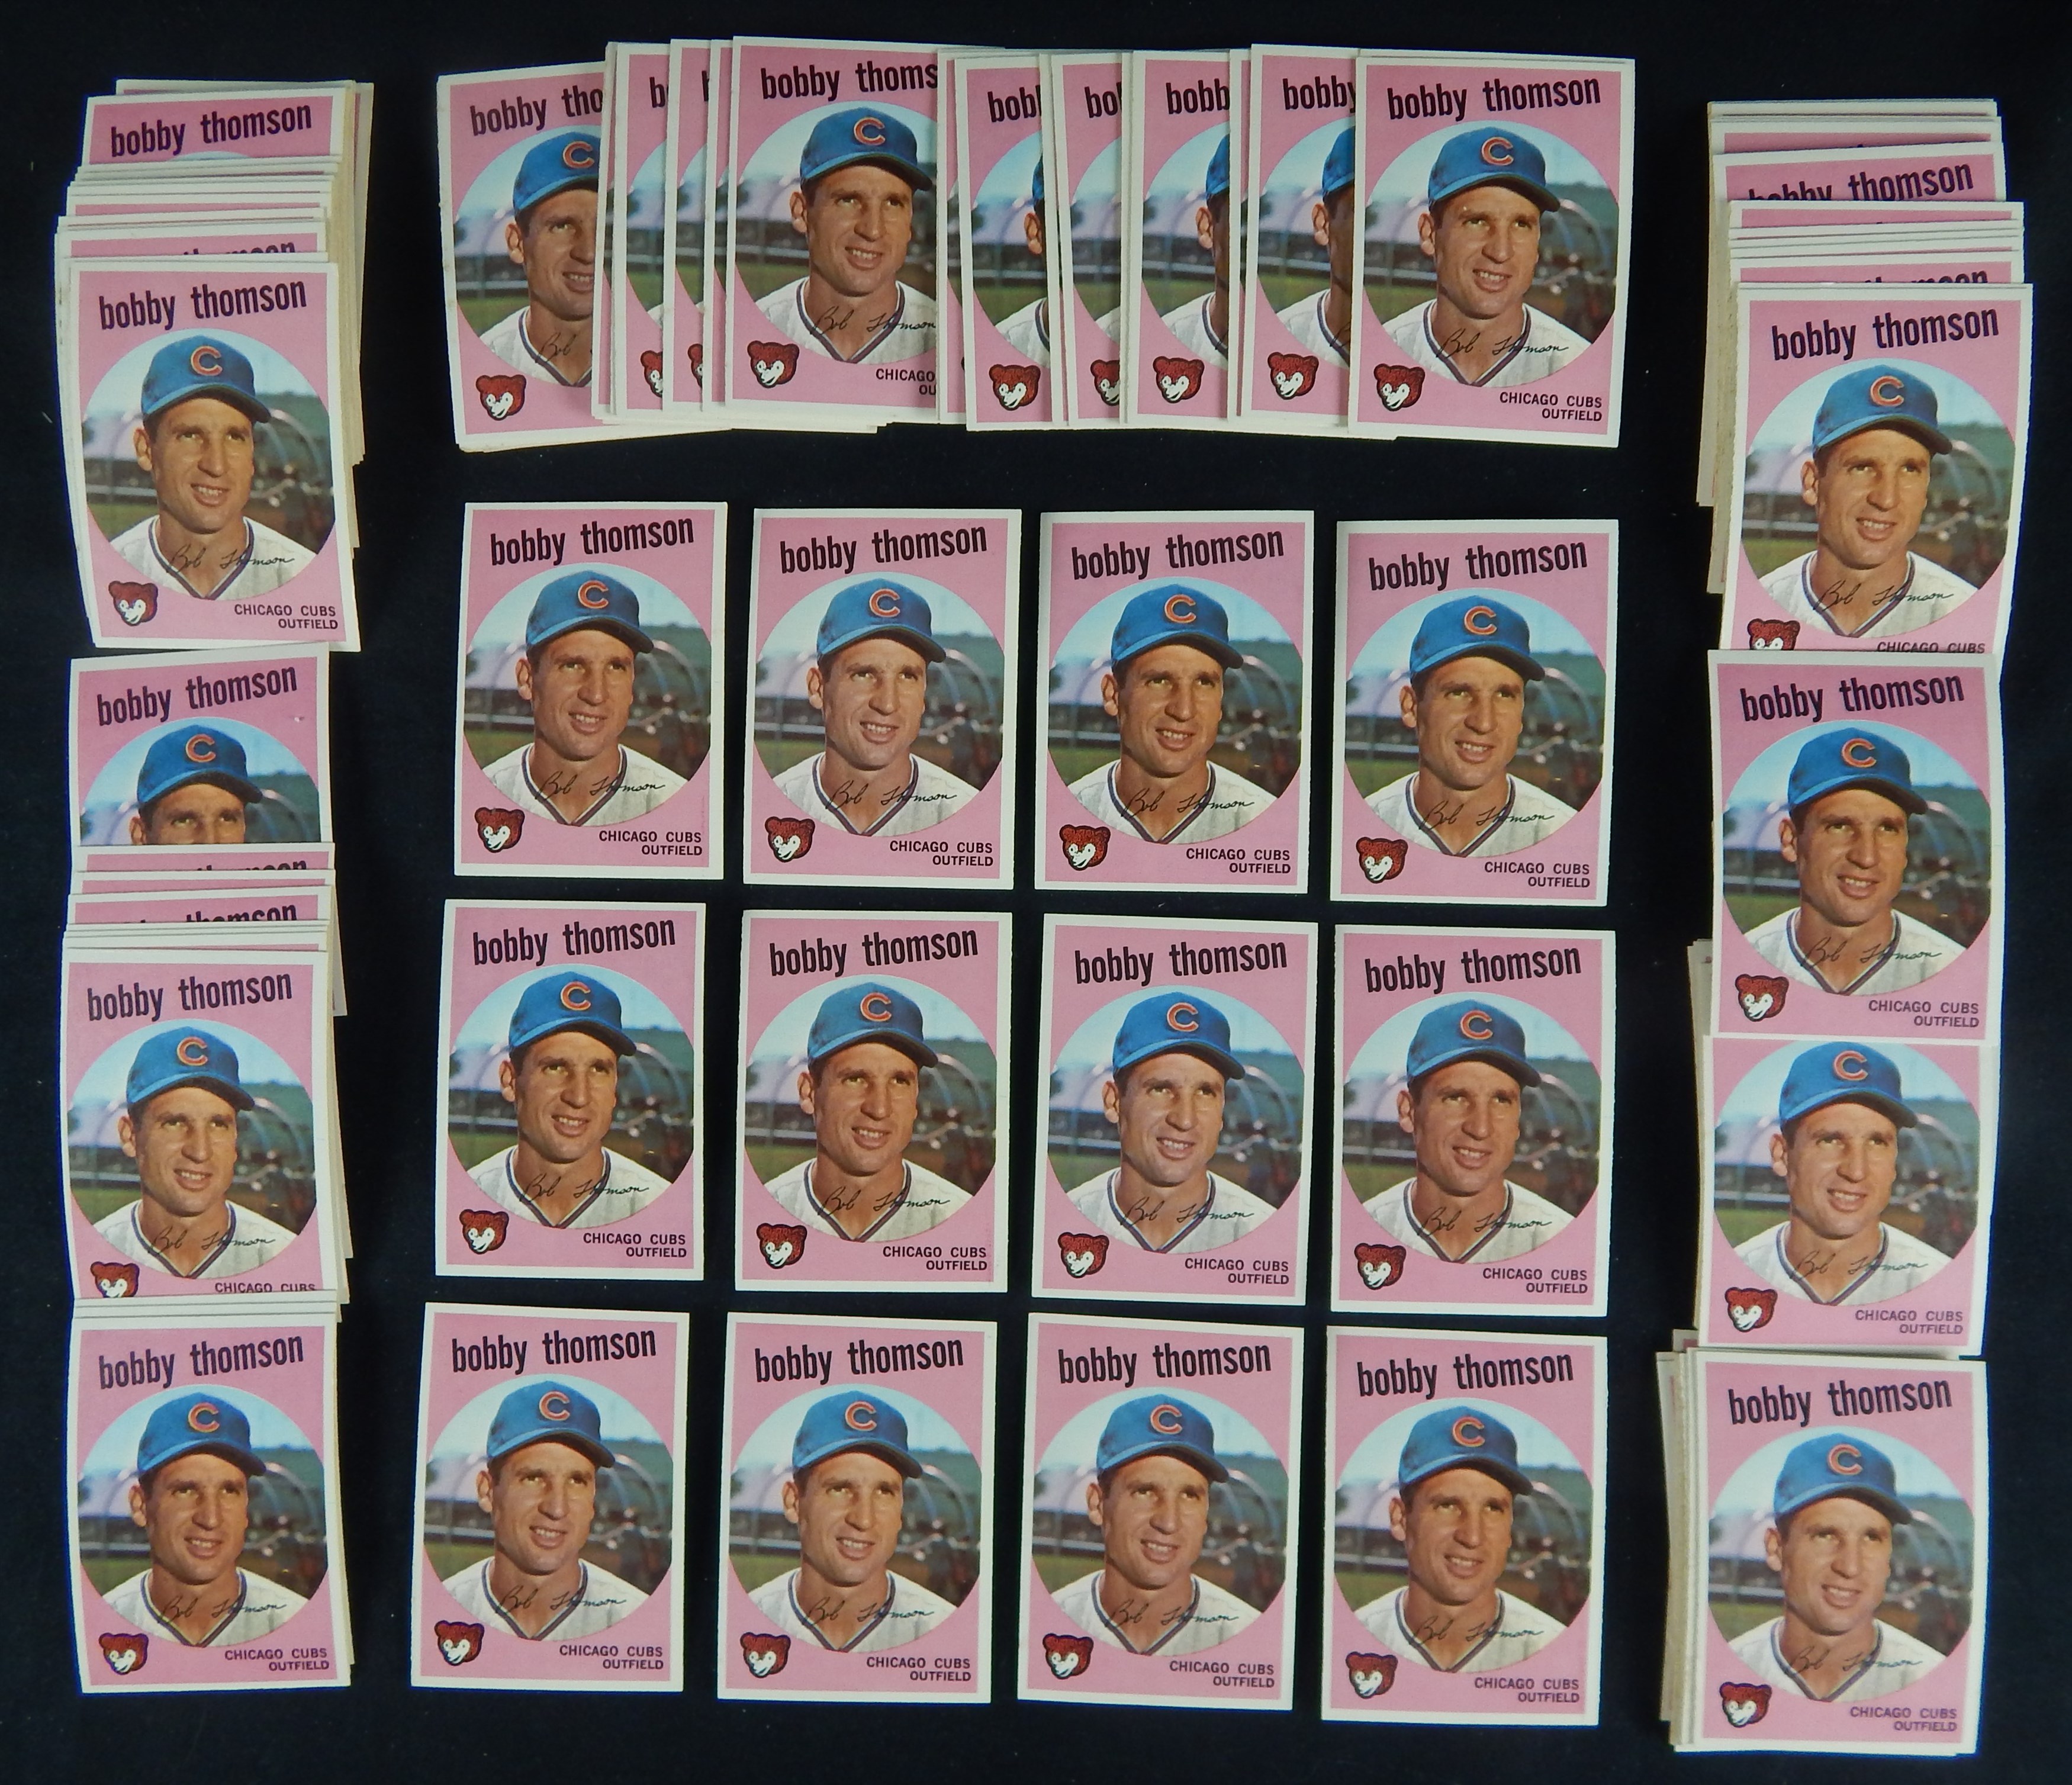 Baseball and Trading Cards - 1959 Topps #429 Bobby Thomson Vending Lot of 117 Cards